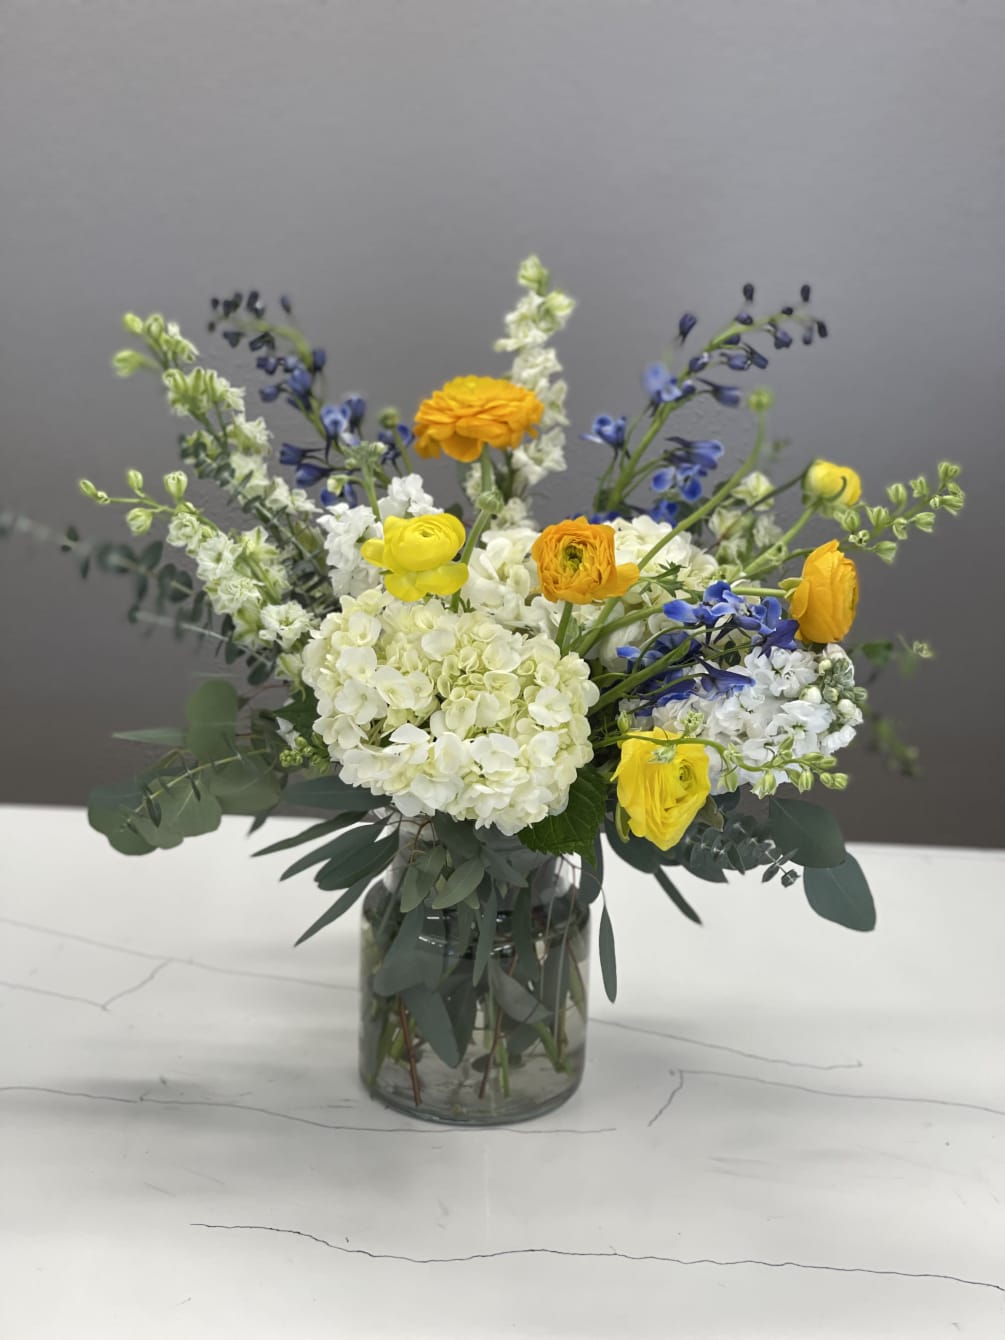 An iteration of Van Gogh&#039;s famous painting with a springtime twist and